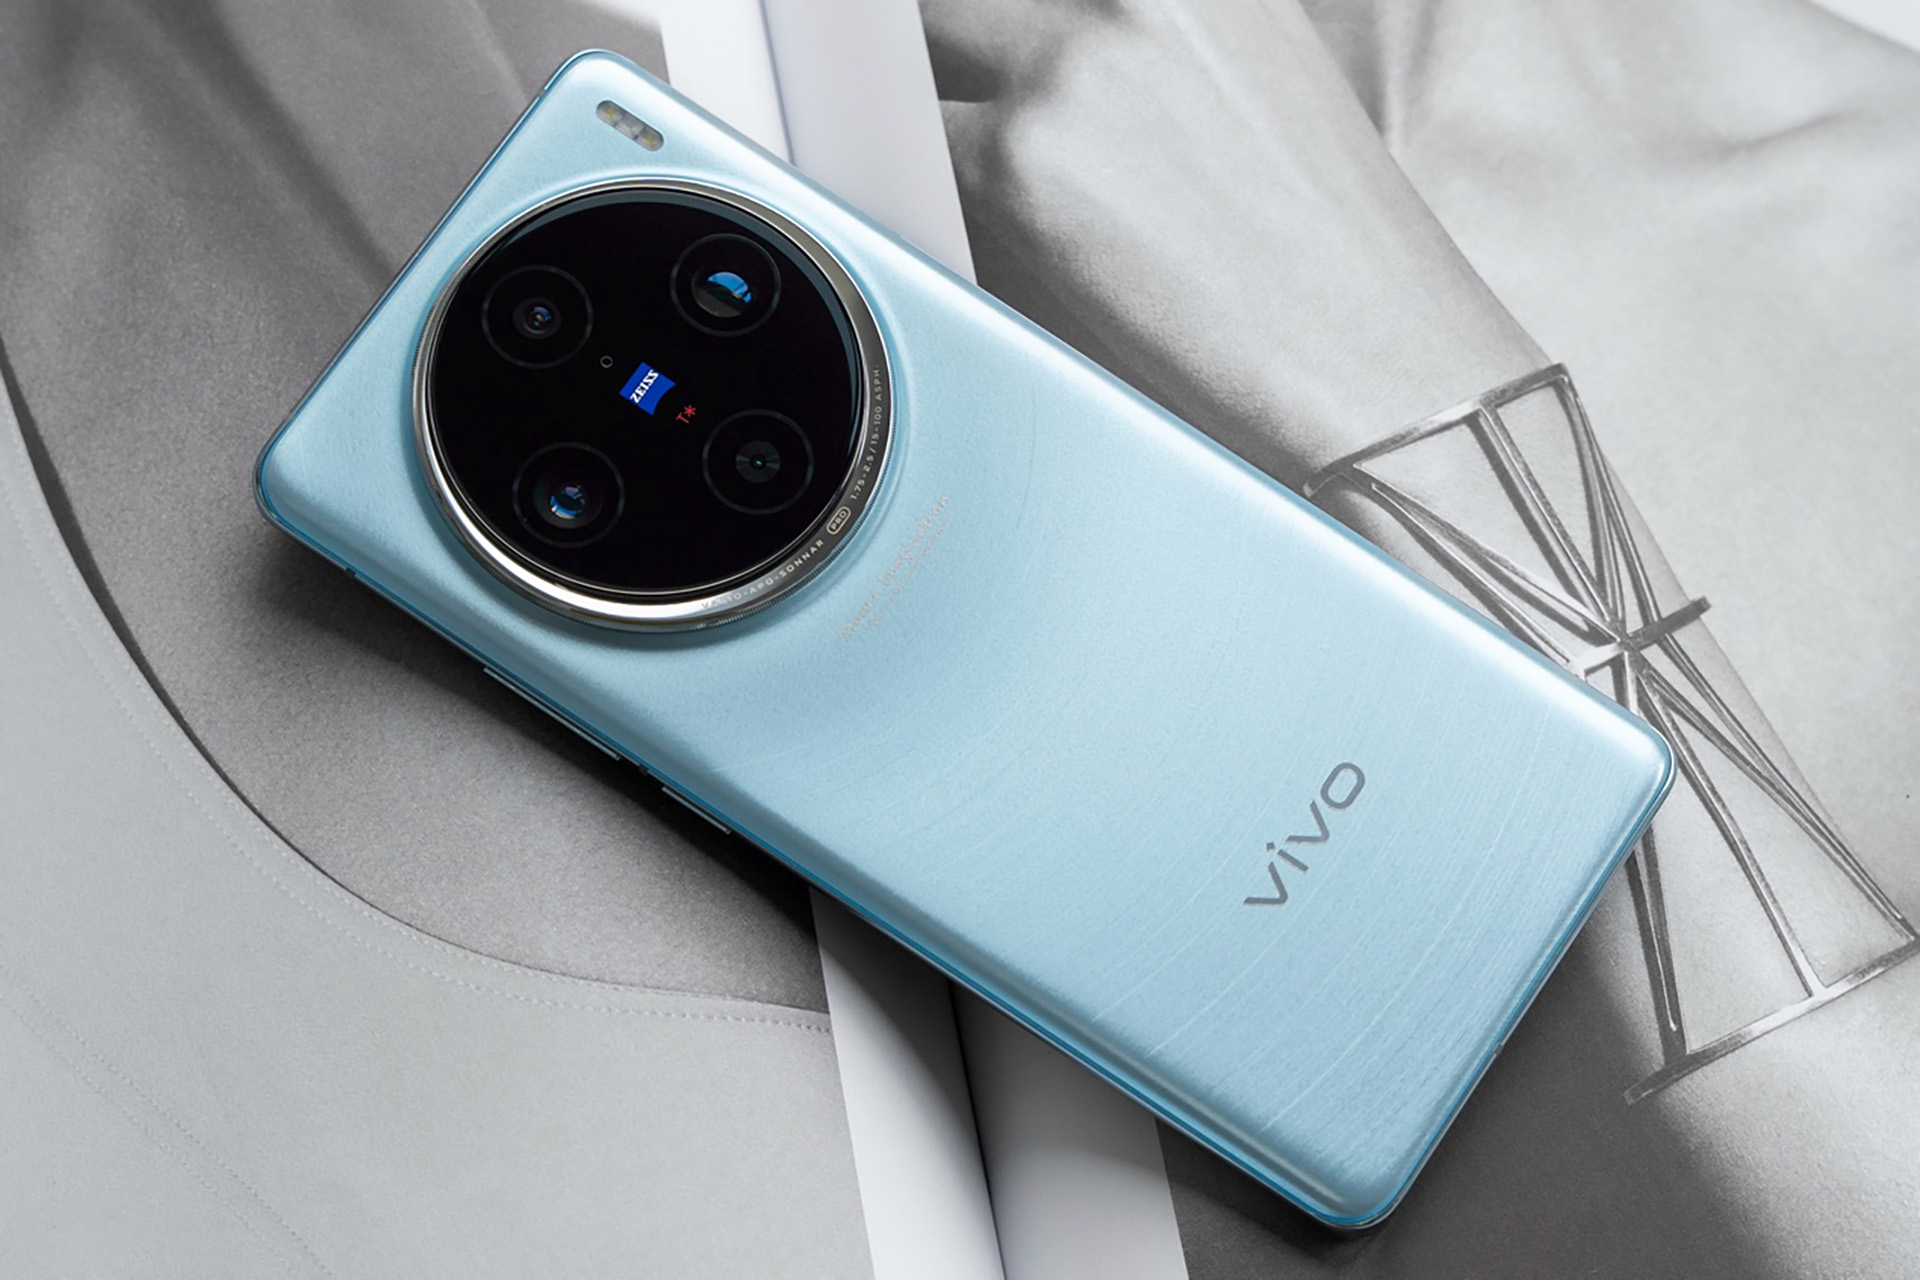 Vivo X100 Pro shown in new colour with official camera samples as Vivo X100  camera specifications detailed -  News